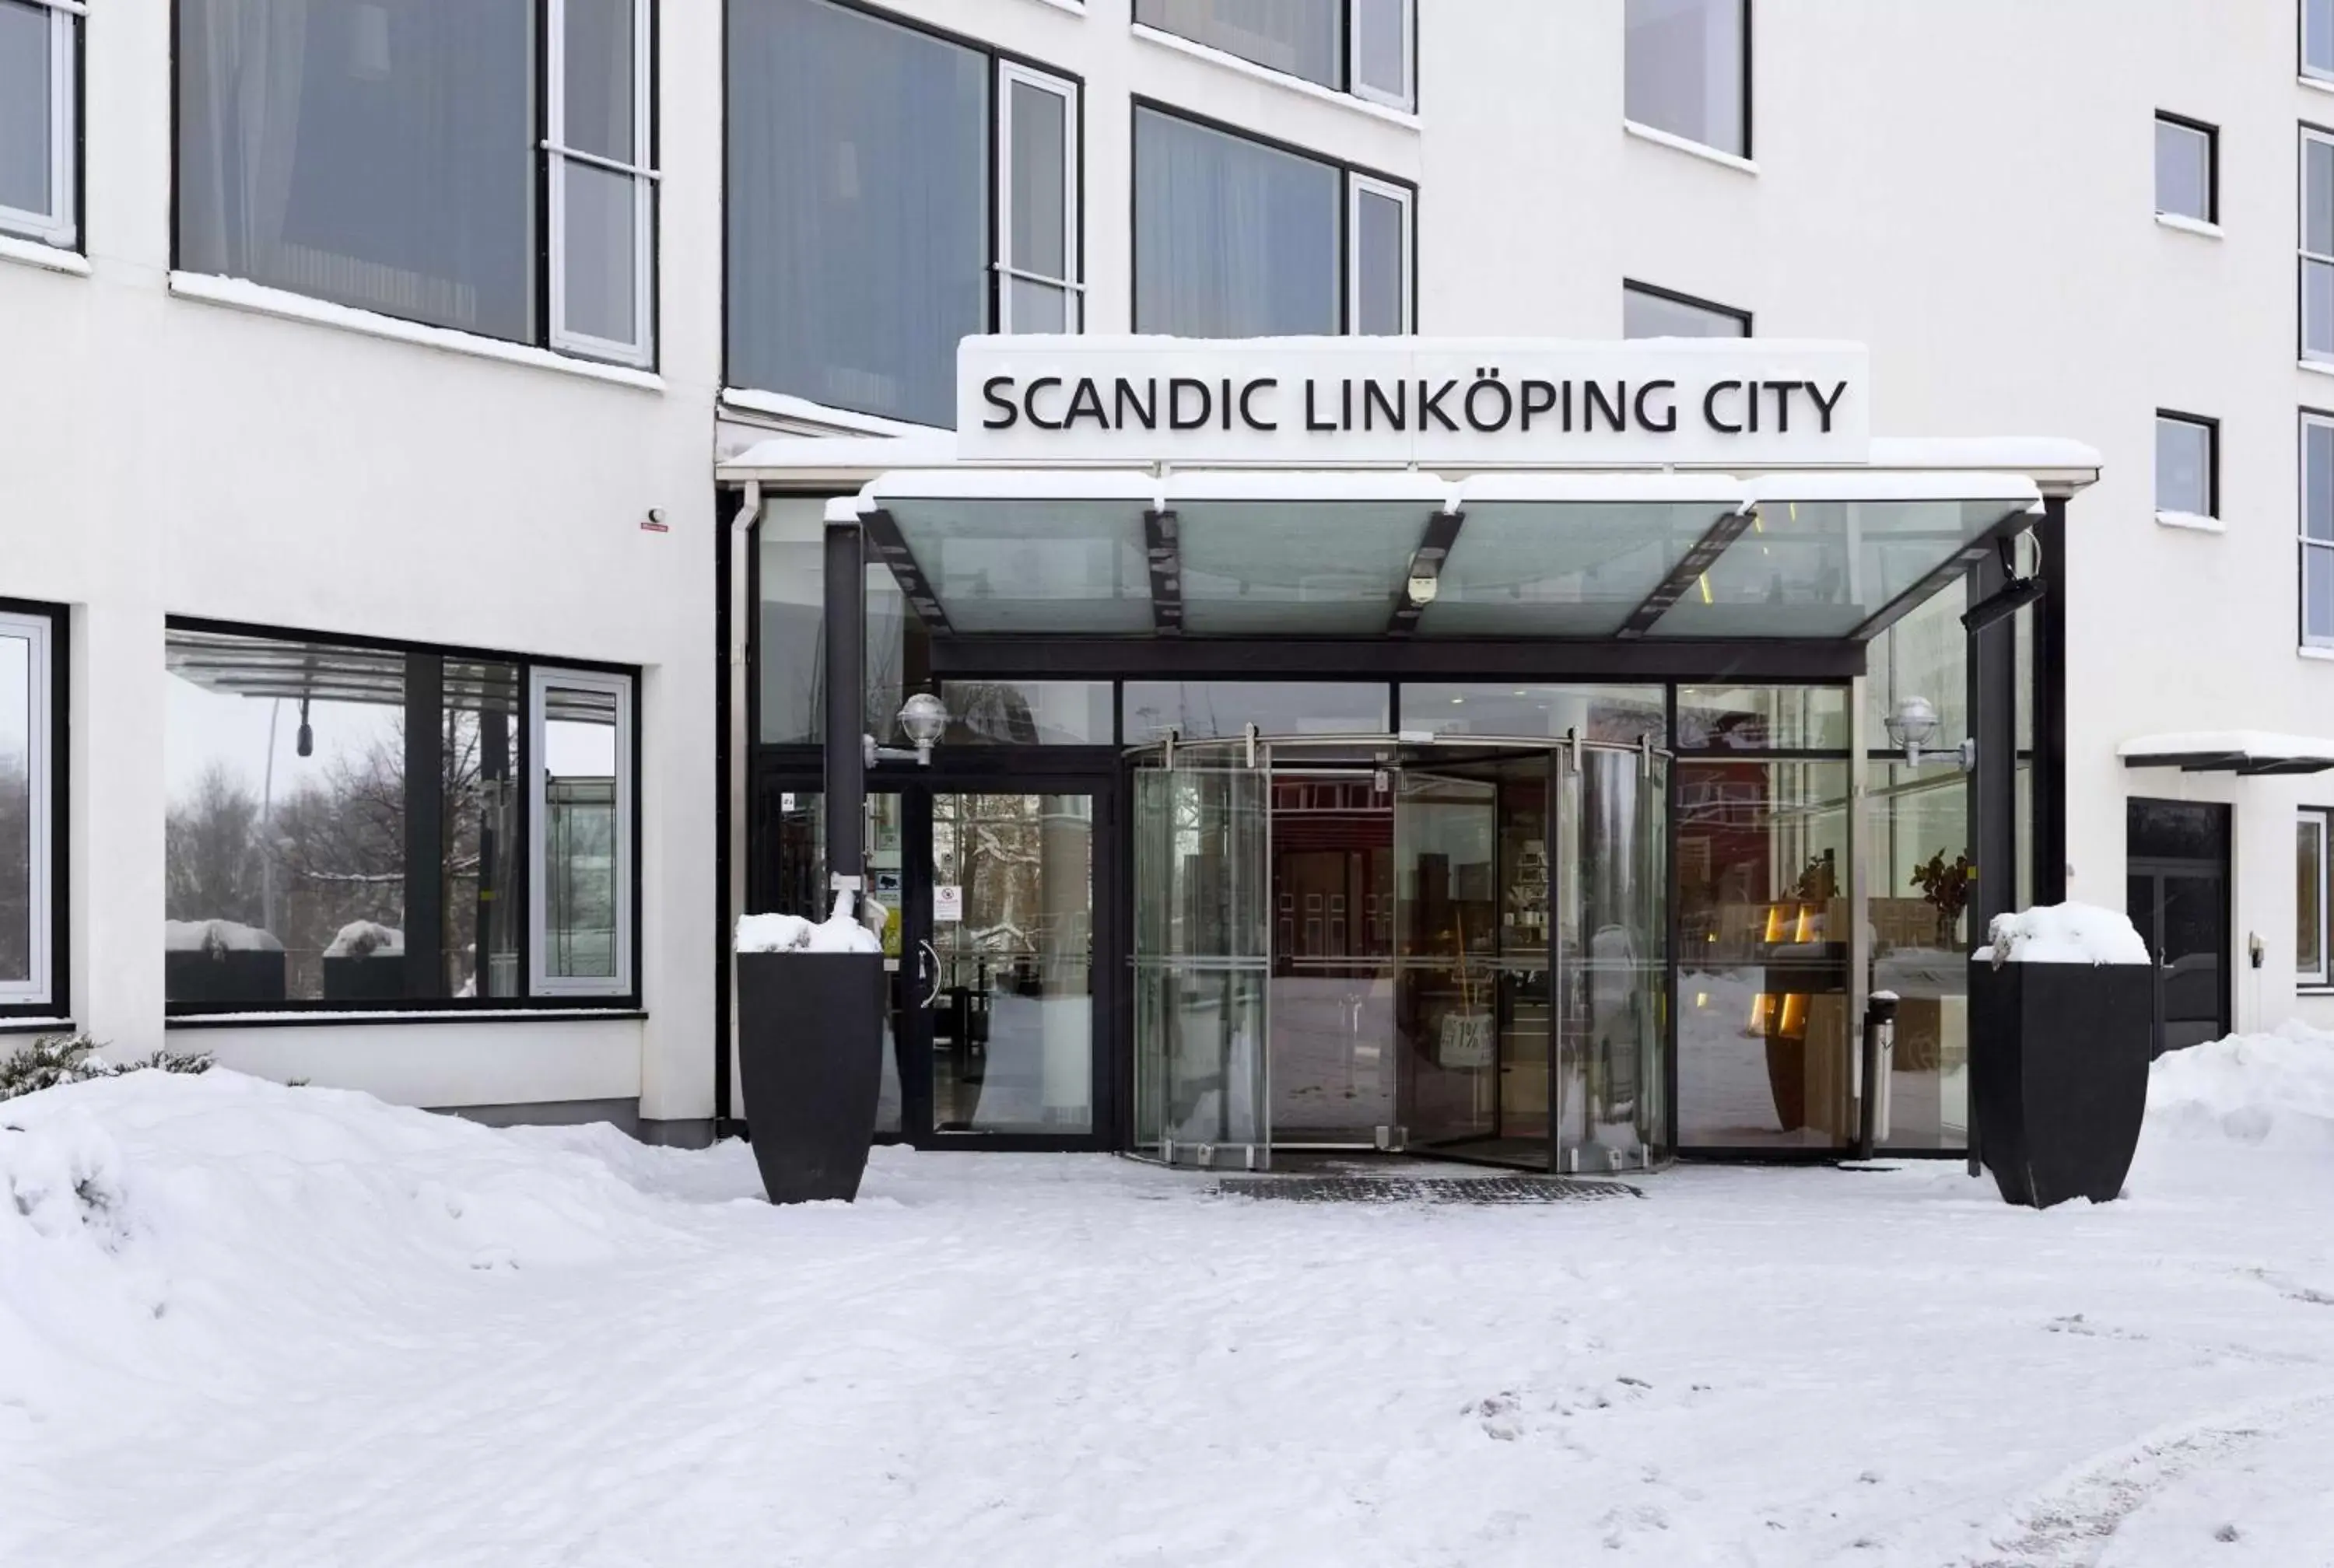 Property Building in Scandic Linköping City